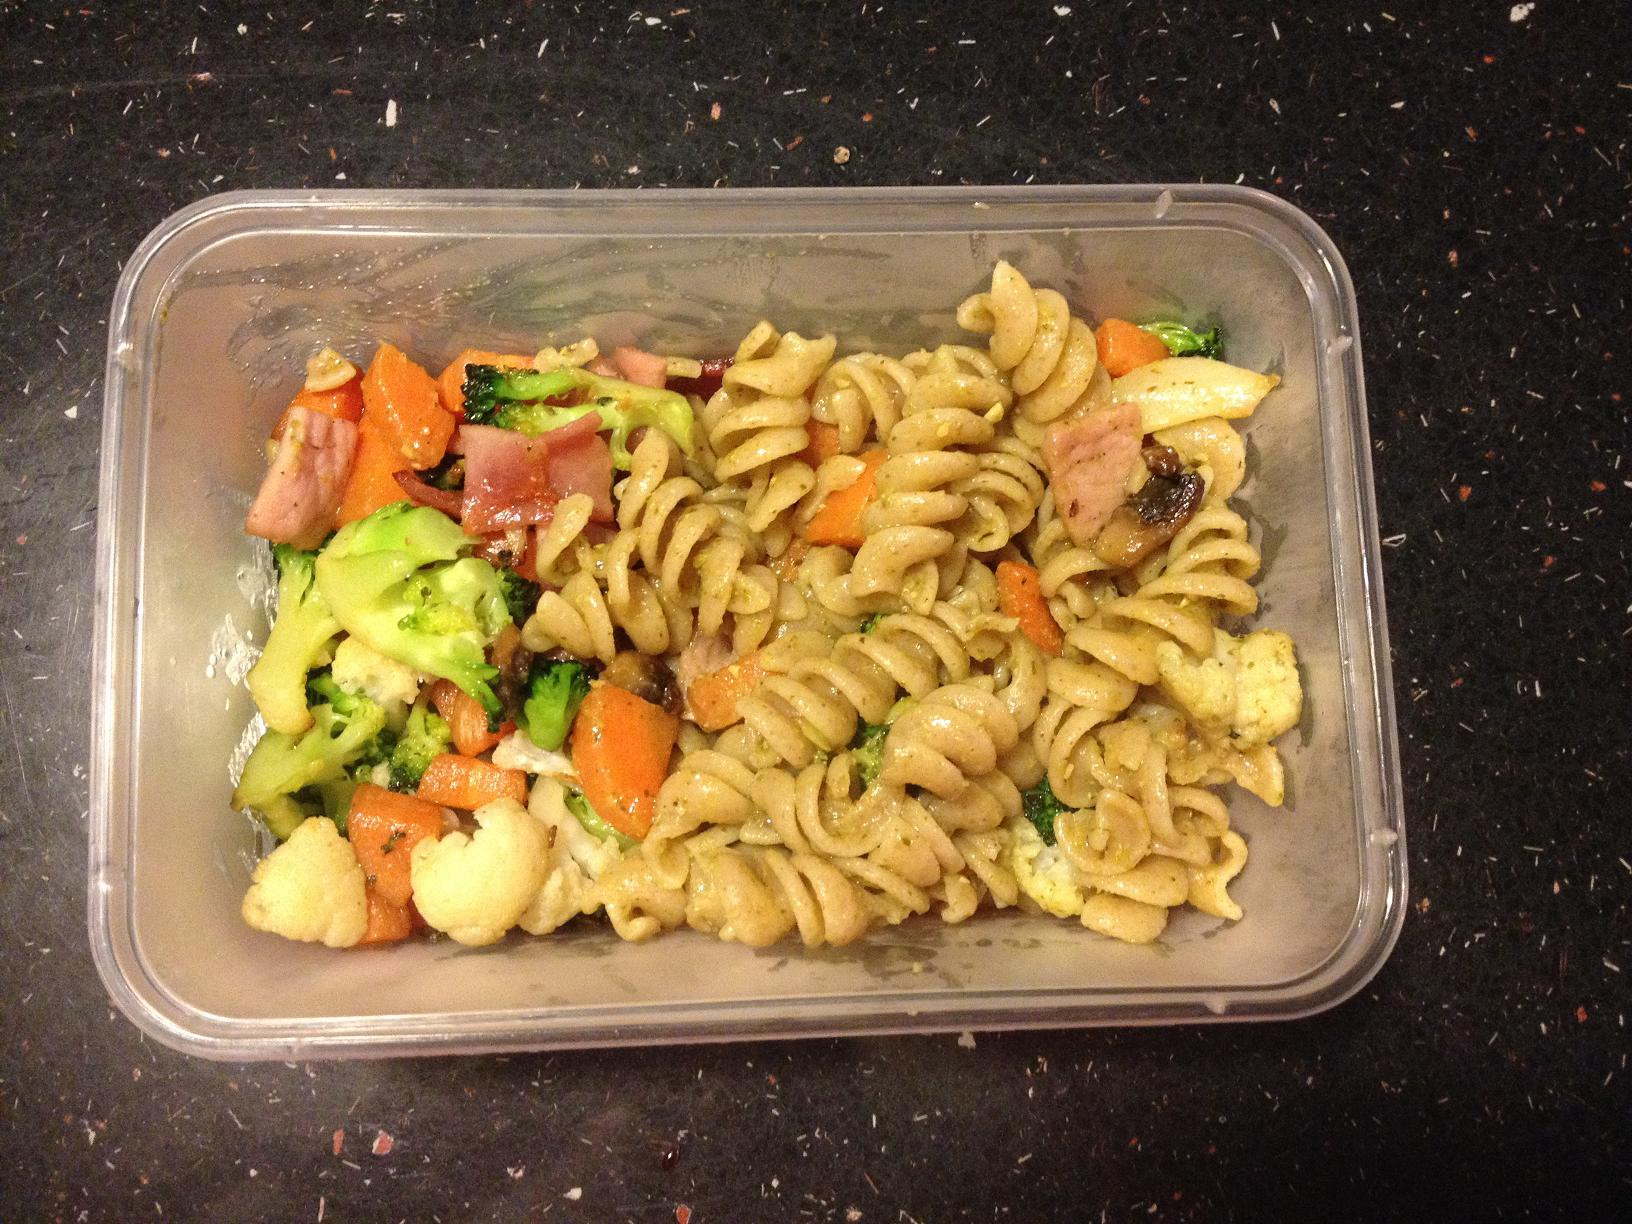 Healthy Lunches To Take To Work
 Healthy Meals to Take to Work